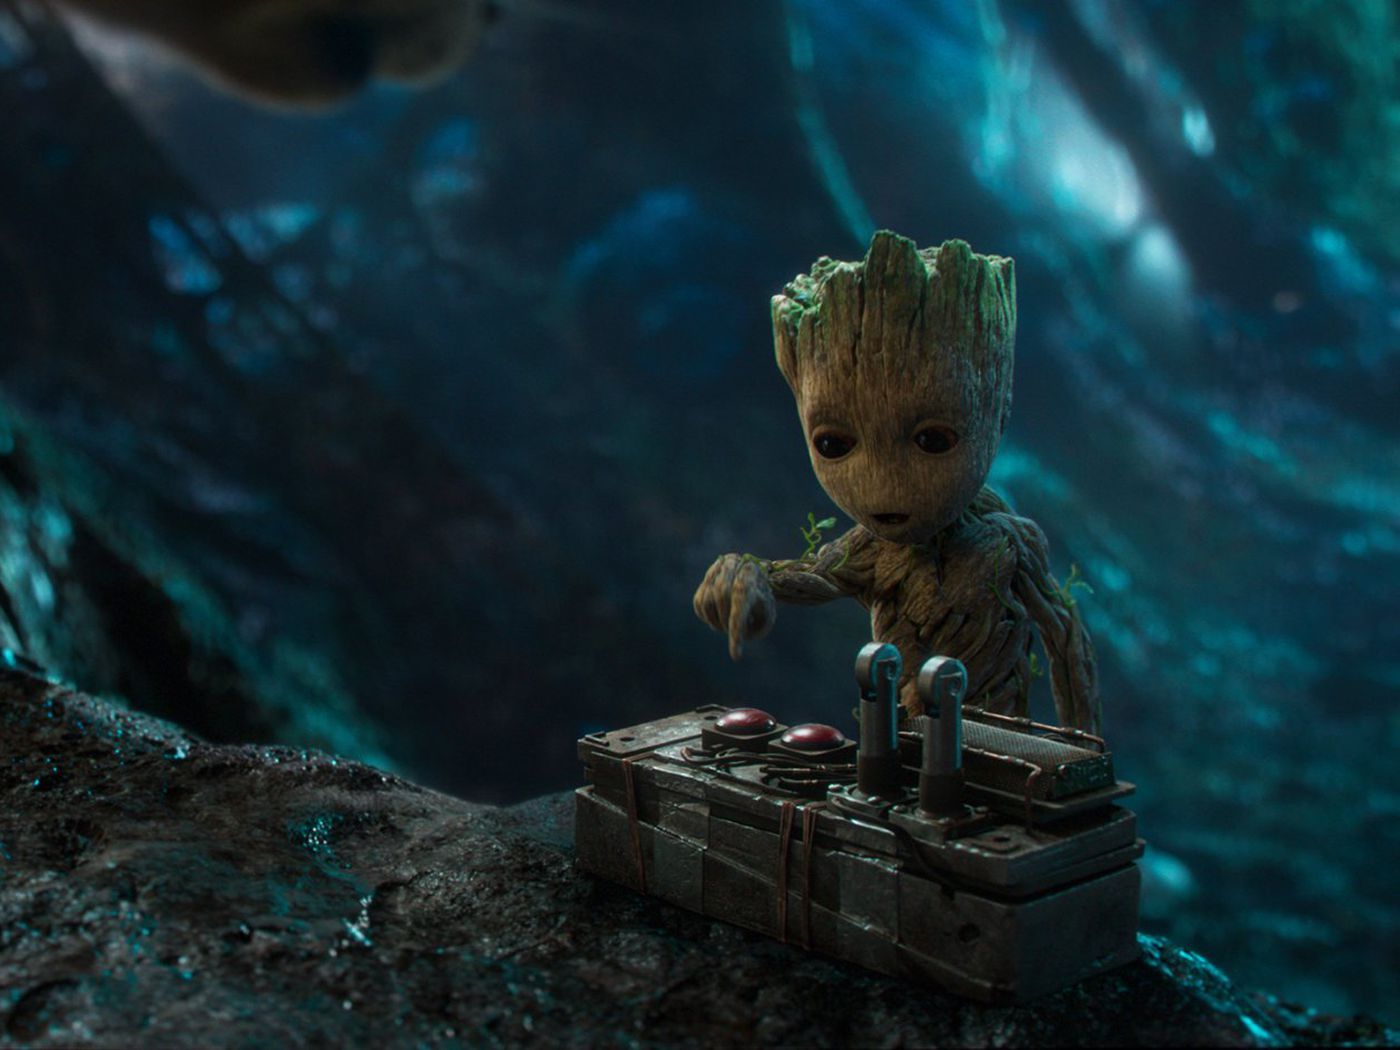 Review: Guardians of the Galaxy Vol. 2 is Marvel's funniest film